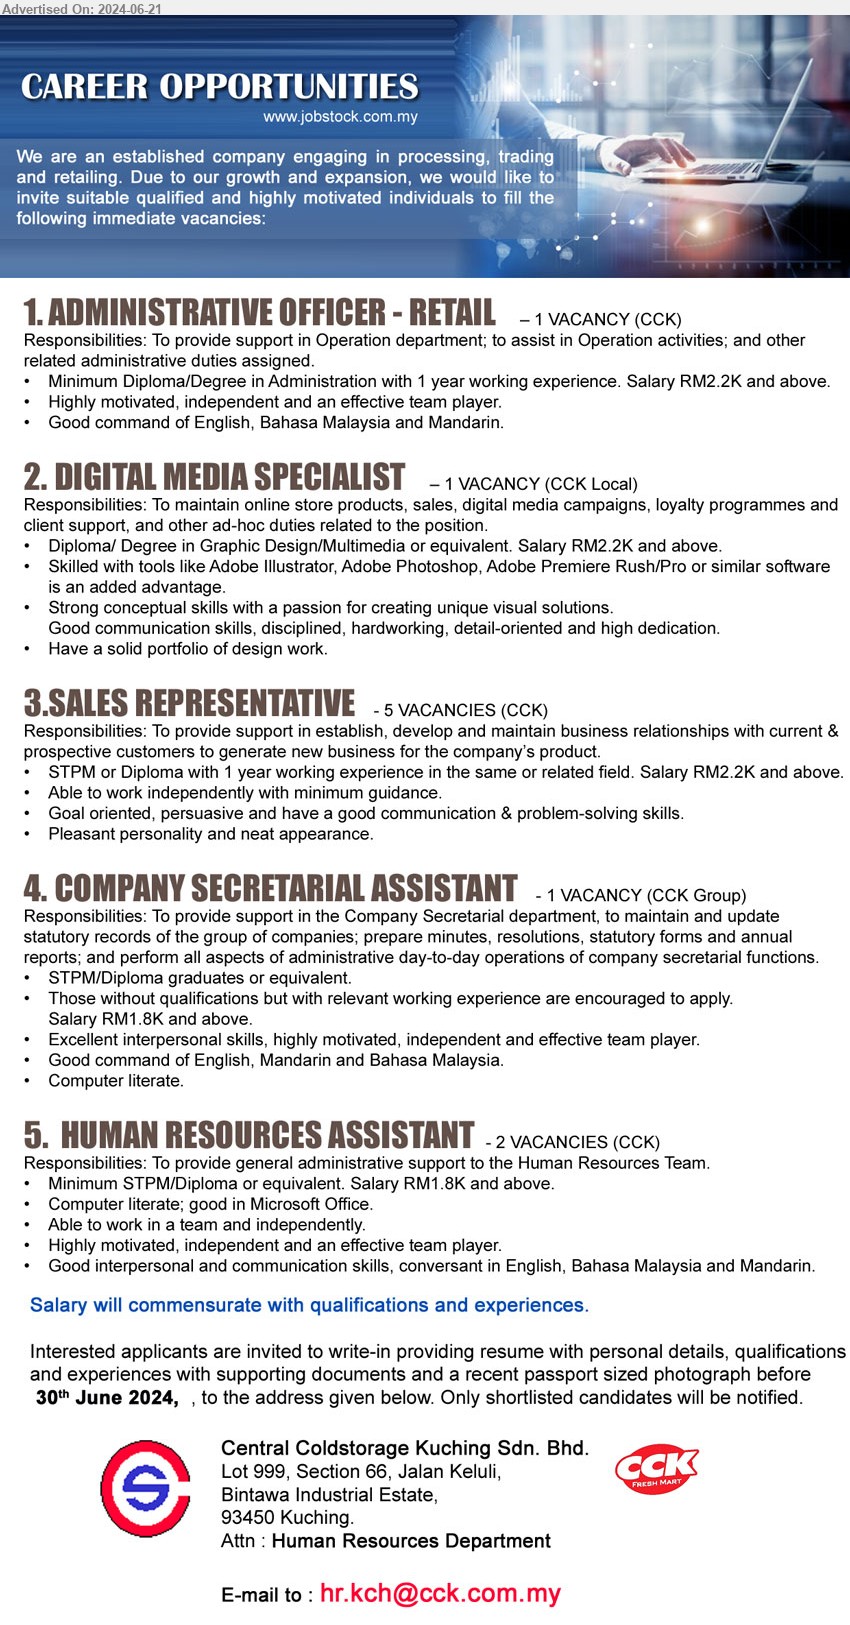 CENTRAL COLDSTORAGE KUCHING SDN BHD - 1. ADMINISTRATIVE OFFICER - RETAIL (Kuching), Diploma/Degree in Administration with 1 year working experience. Salary RM2.2K and above,...
2. DIGITAL MEDIA SPECIALIST  (Kuching), Diploma/ Degree in Graphic Design/Multimedia or equivalent. Salary RM2.2K and above,...
3. SALES REPRESENTATIVE (Kuching), 5 posts, STPM or Diploma with 1 year working experience in the same or related field. Salary RM2.2K and above,...
4. COMPANY SECRETARIAL ASSISTANT  (Kuching), STPM/Diploma graduates, hose without qualifications but with relevant working experience are encouraged to apply, Salary RM1.8K and above,...
5. HUMAN RESOURCES ASSISTANT  (Kuching), 2posts, STPM/Diploma or equivalent. Salary RM1.8K and above,...
Email resume to ...
